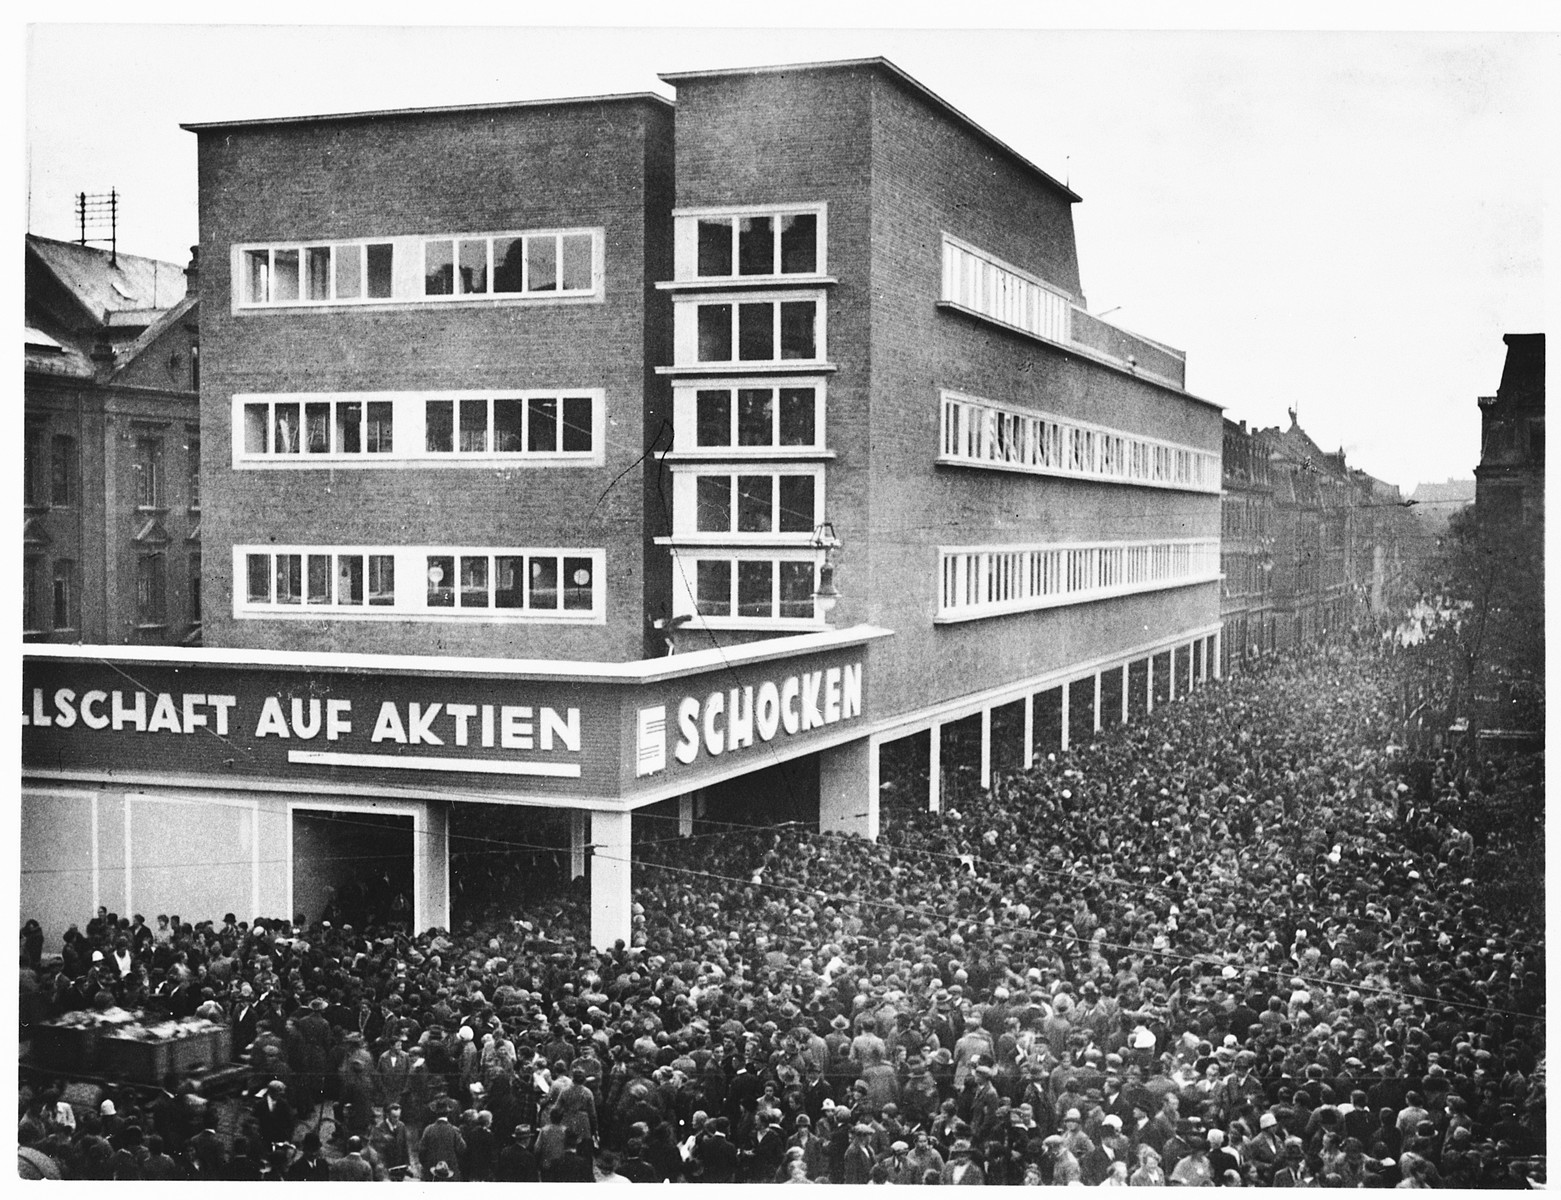 A huge crowd of people gather outside the Schocken department store in Nuremberg, Germany.